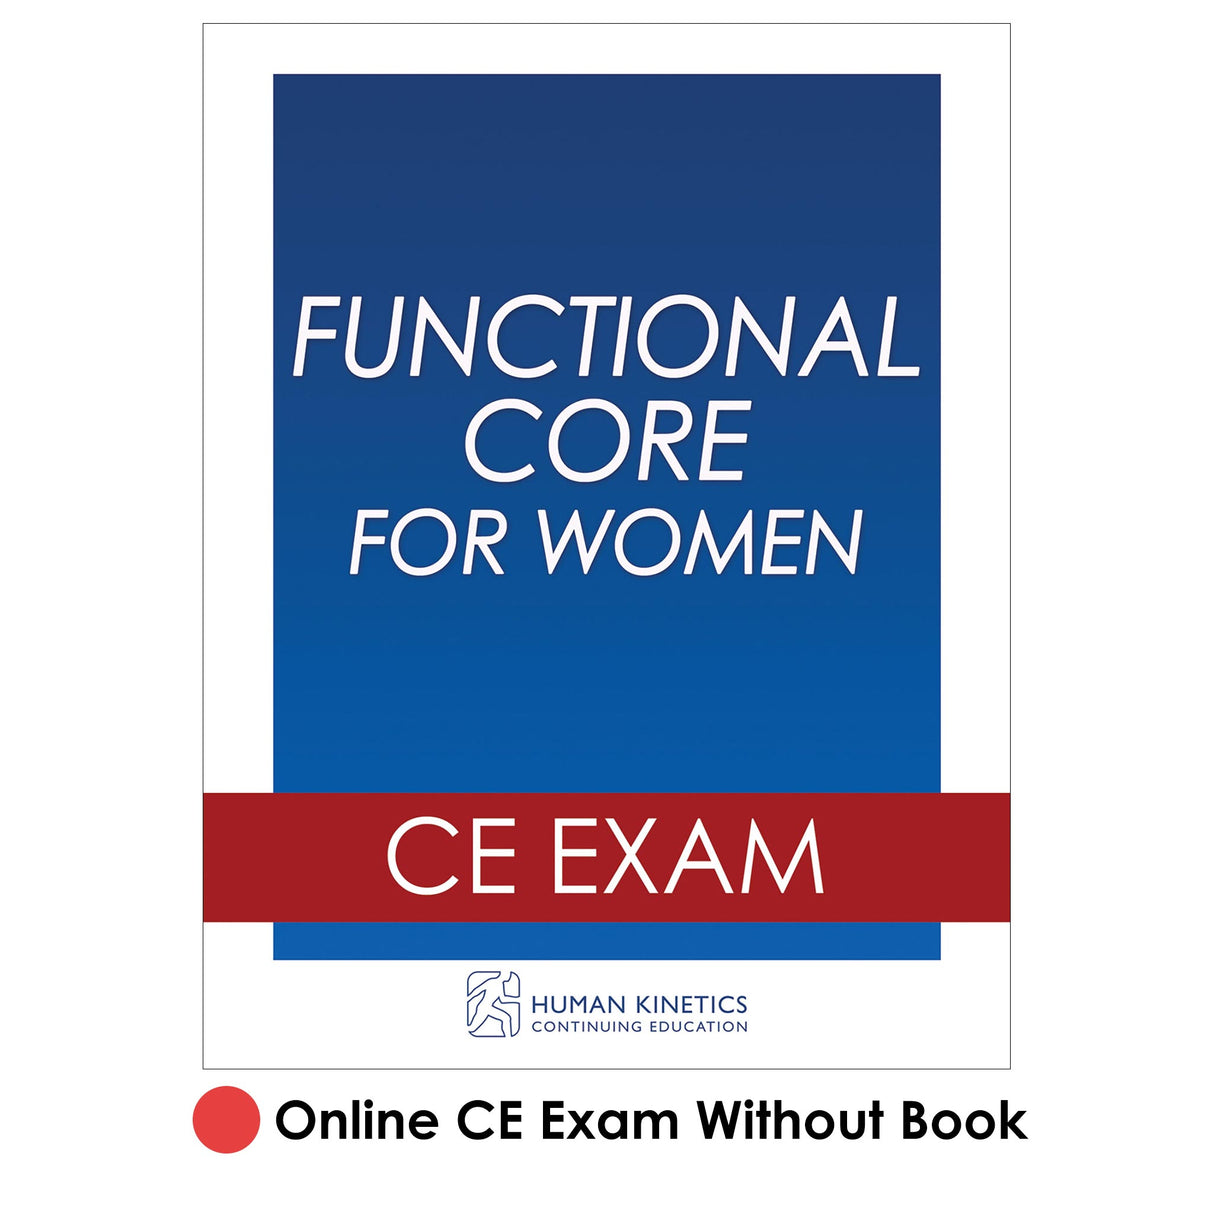 Functional Core for Women Online CE Exam Without Book